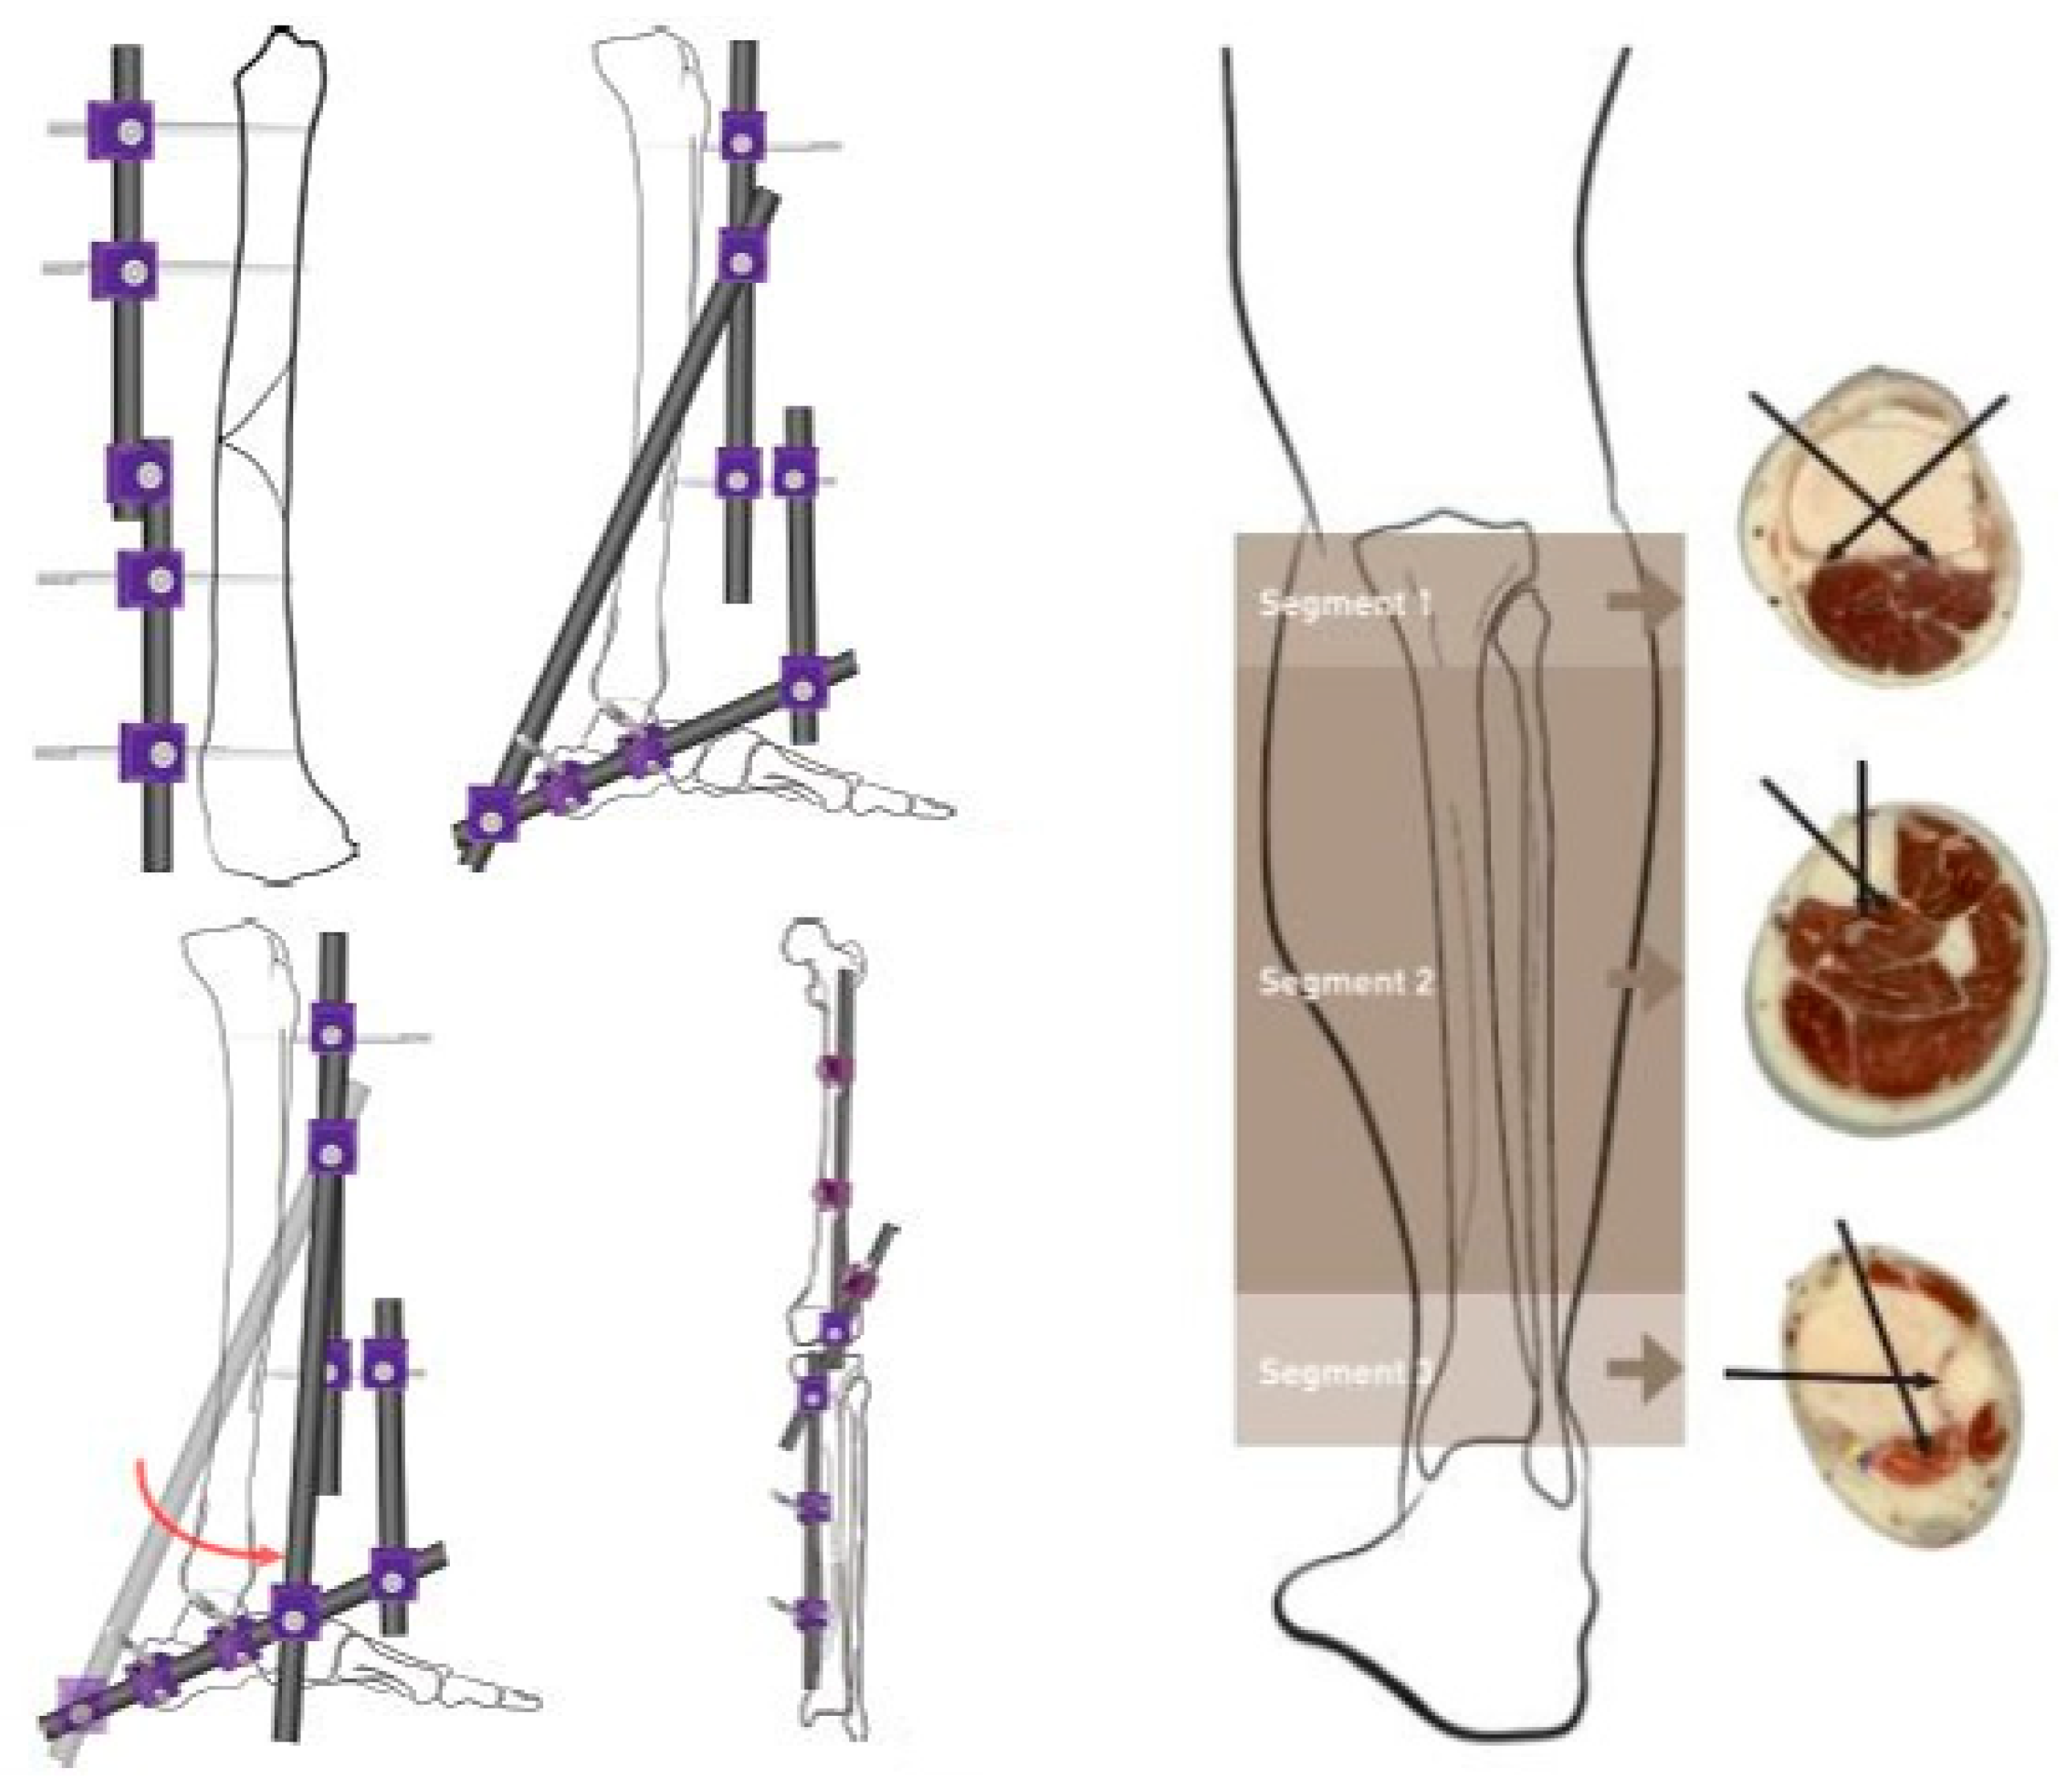 Applied Sciences | Free Full-Text | Biomechanical Evaluation Method to  Optimize External Fixator Configuration in Long Bone Fractures—Conceptual  Model and Experimental Validation Using Pilot Study